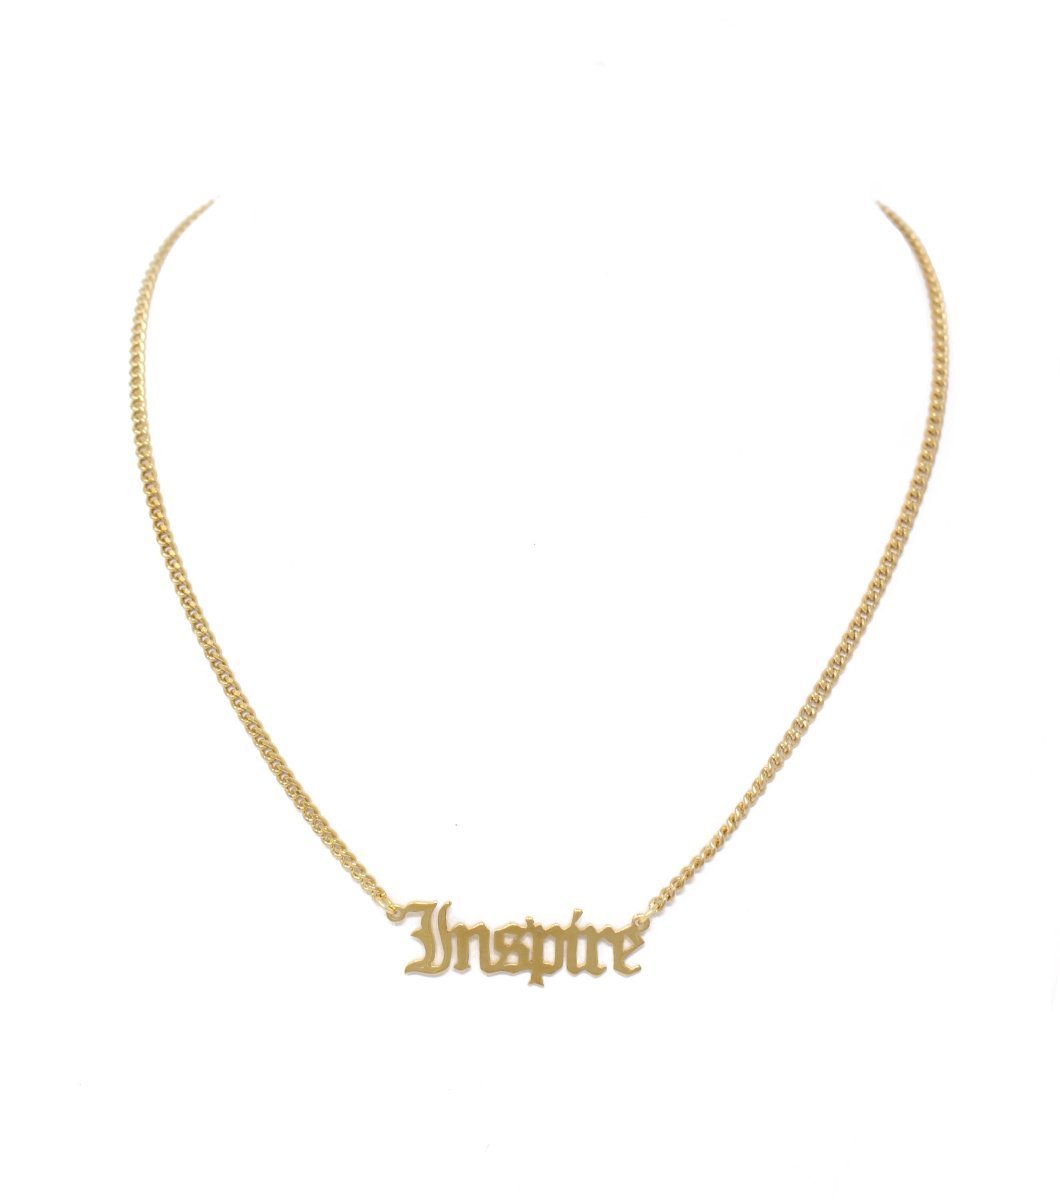 One Self Reminder Inspire Necklace - LAURA CANTU JEWELRY US